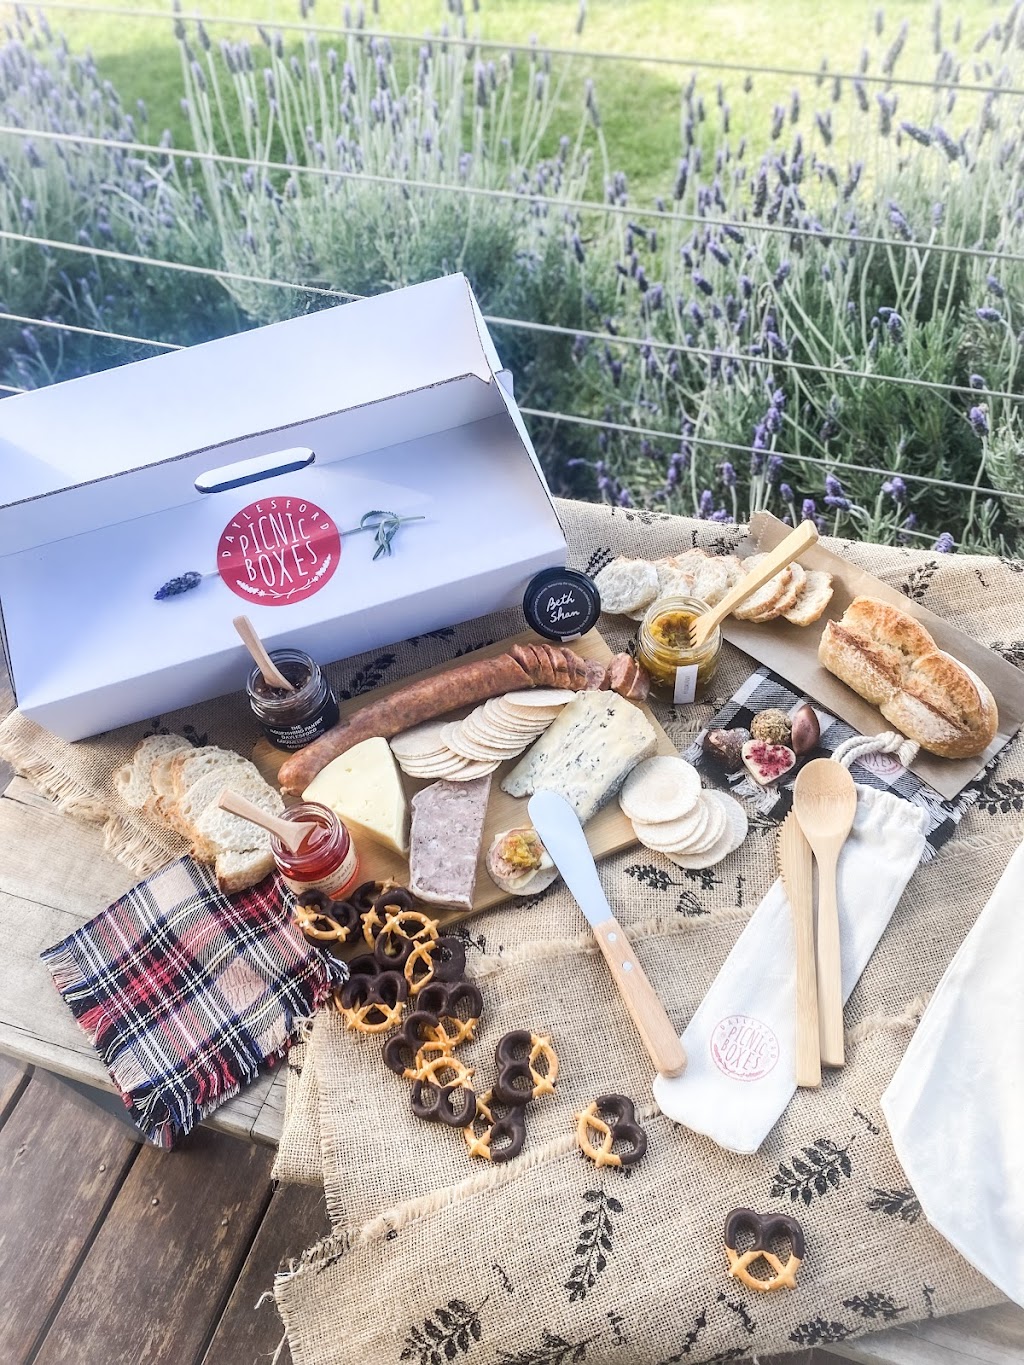 Daylesford Picnic Boxes | meal delivery | 57 Jamieson St, Daylesford VIC 3460, Australia | 0411466429 OR +61 411 466 429